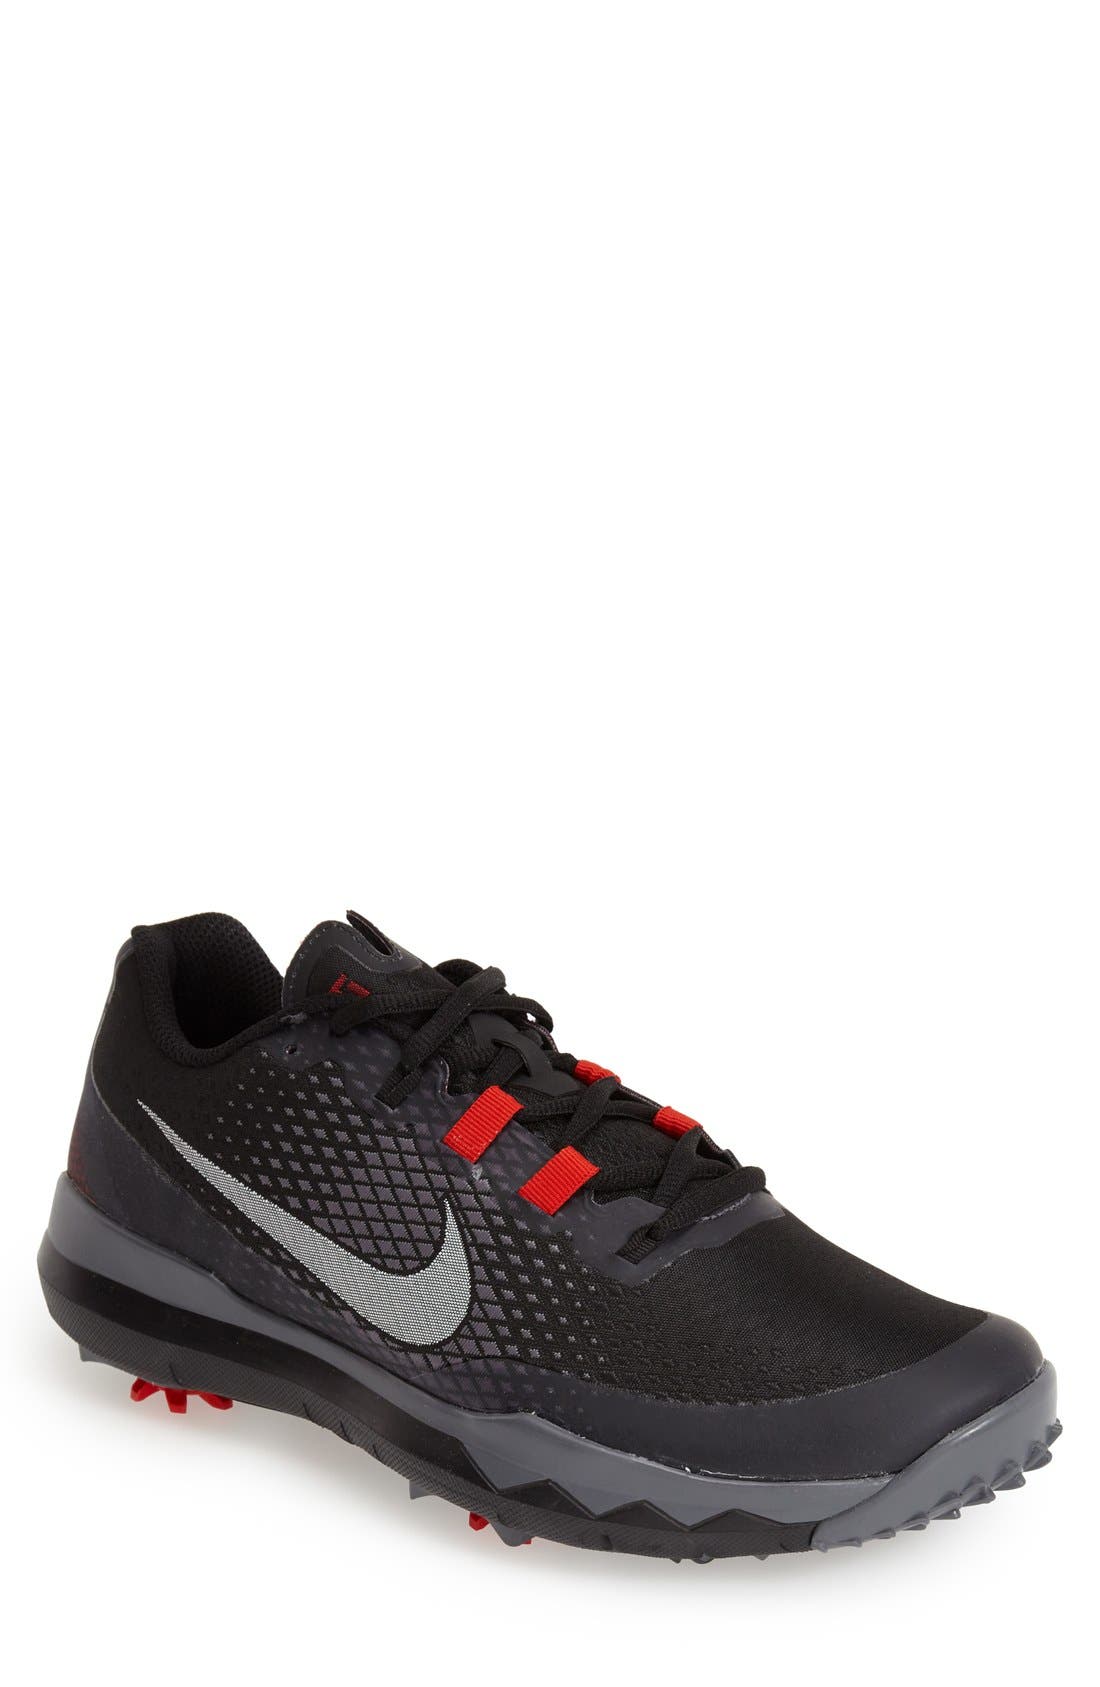 nike tw 15 golf shoes